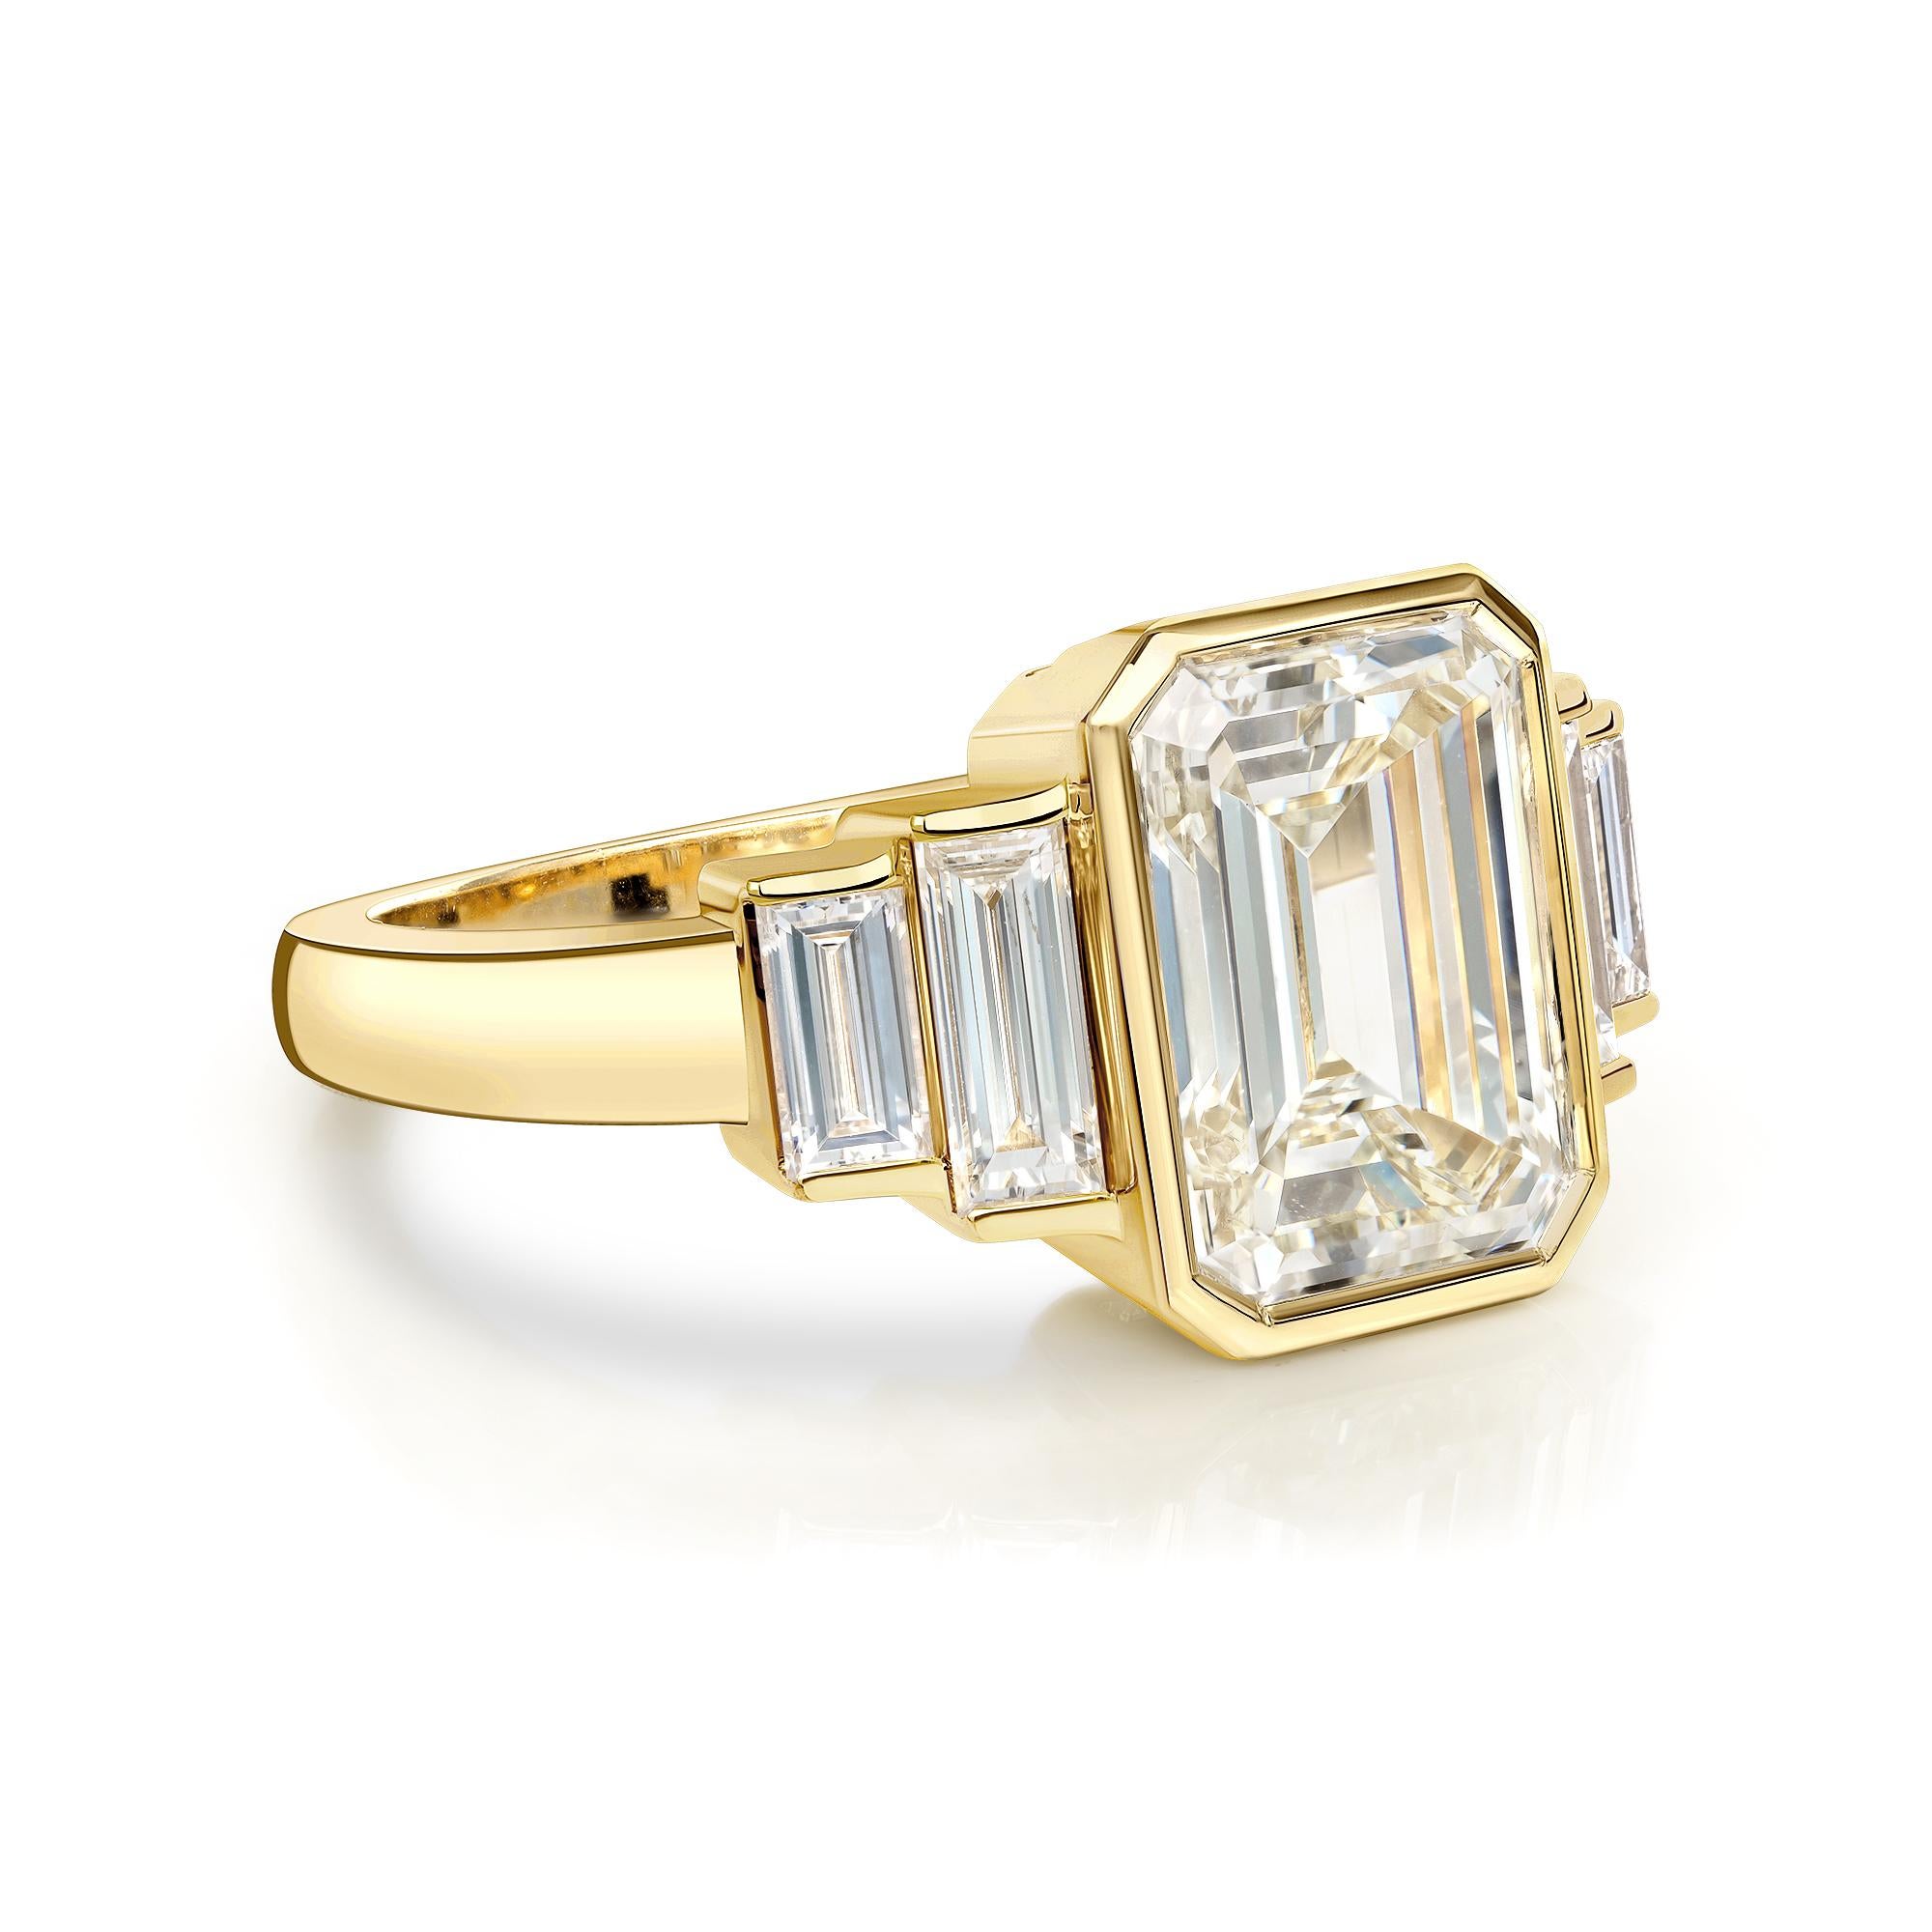 3.09ct N/VS1 GIA certified Emerald cut diamond with 0.74ctw baguette cut accent diamonds bezel set in a handcrafted 18K yellow gold mounting.